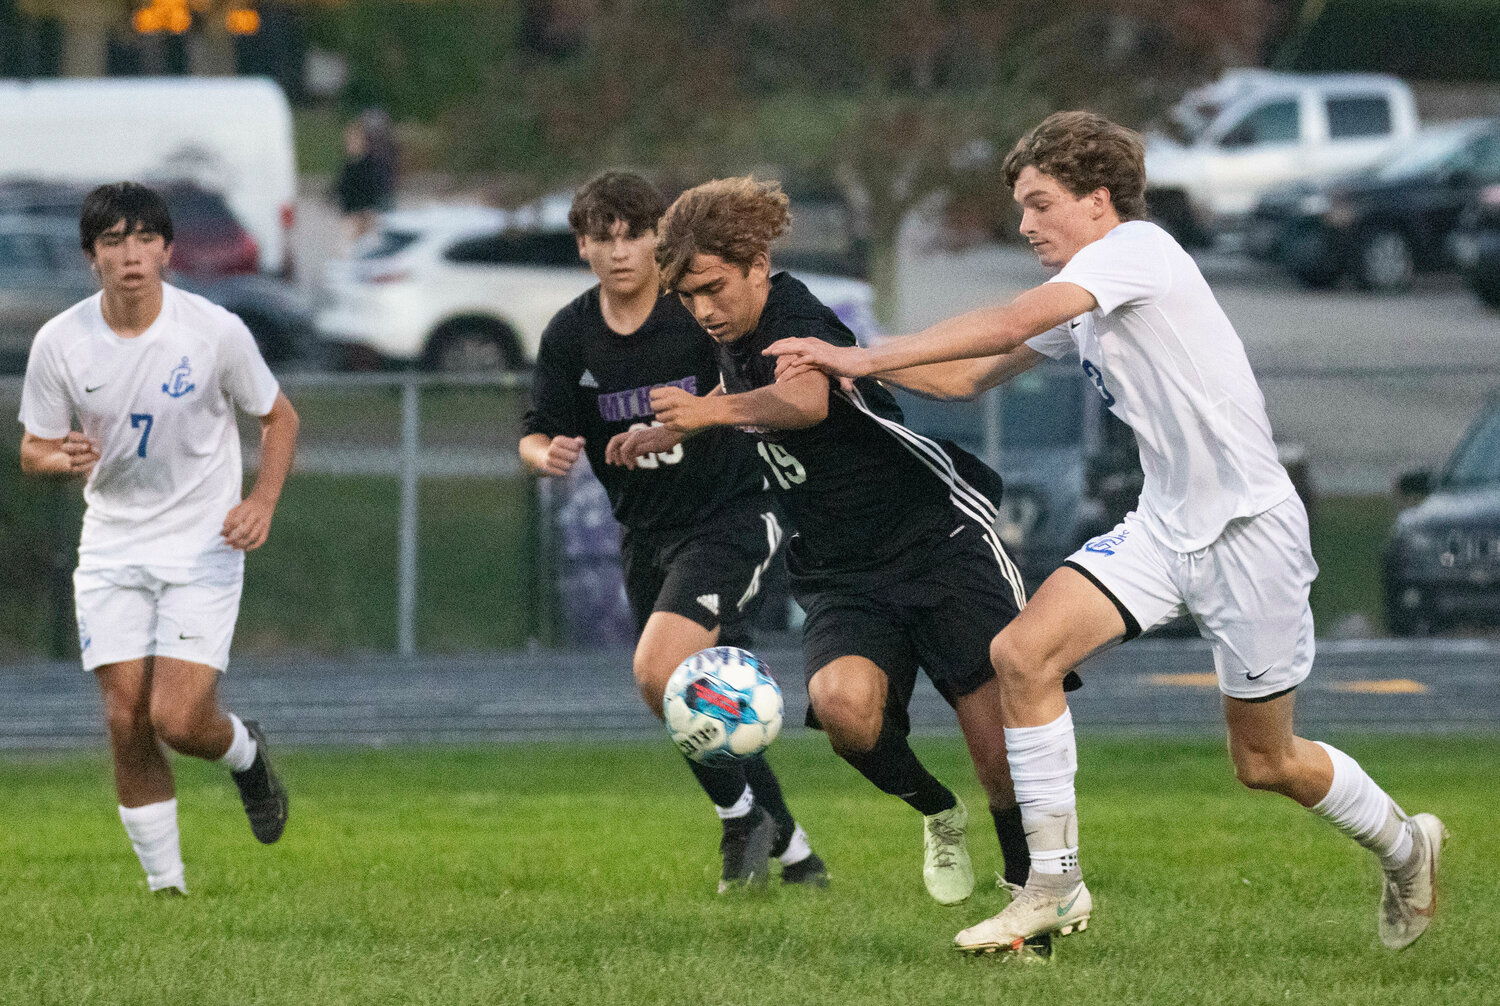 Maddox Canario Dribbles up field with teammate Dylan DeOliveira looking on.